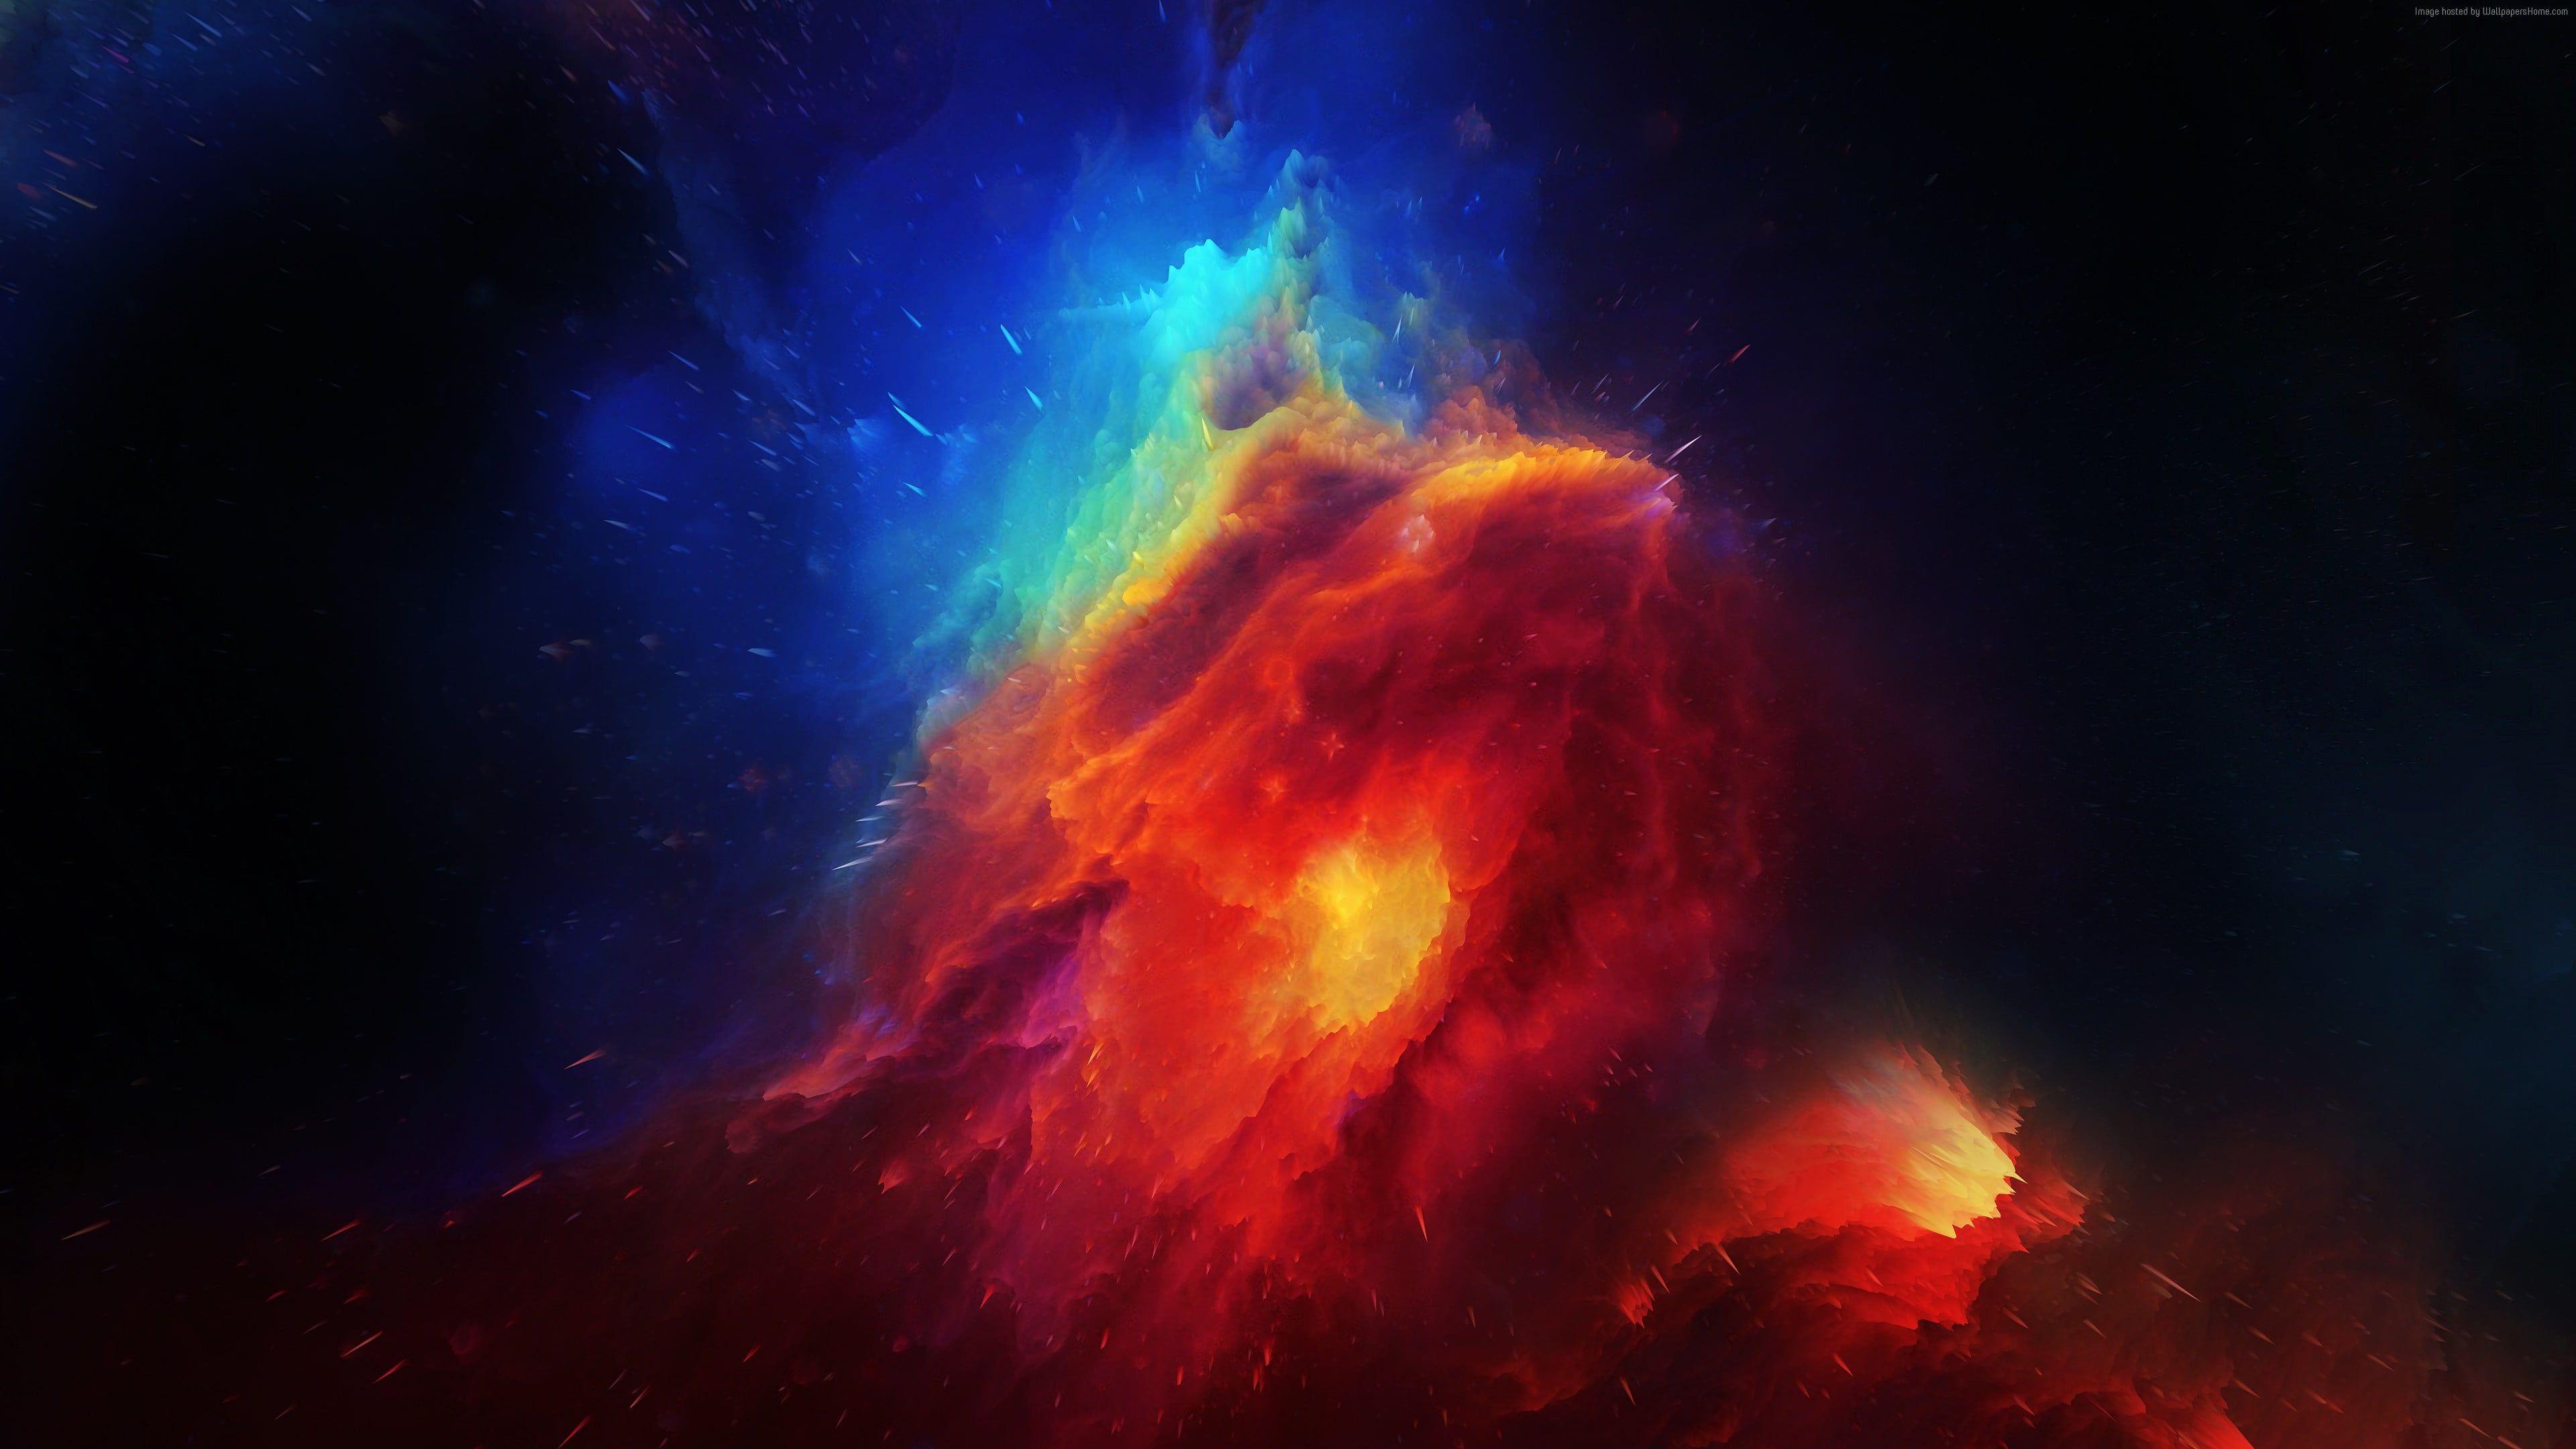 4k Resolution Red And Blue Galaxy Wallpaper Hd